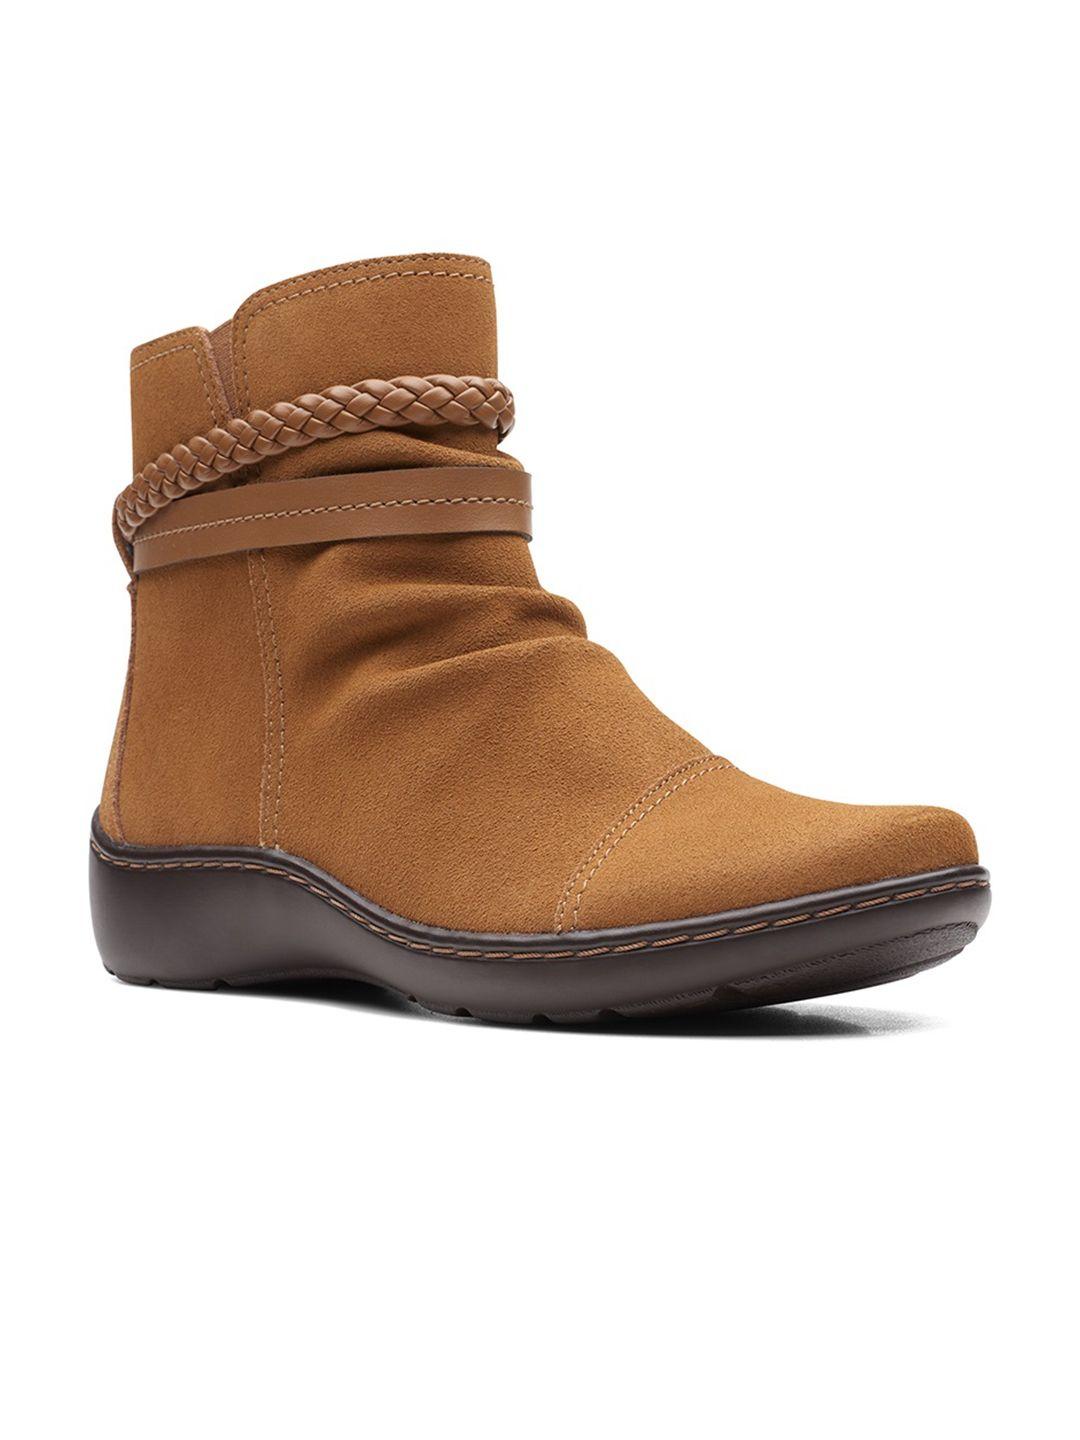 clarks women ankle boots